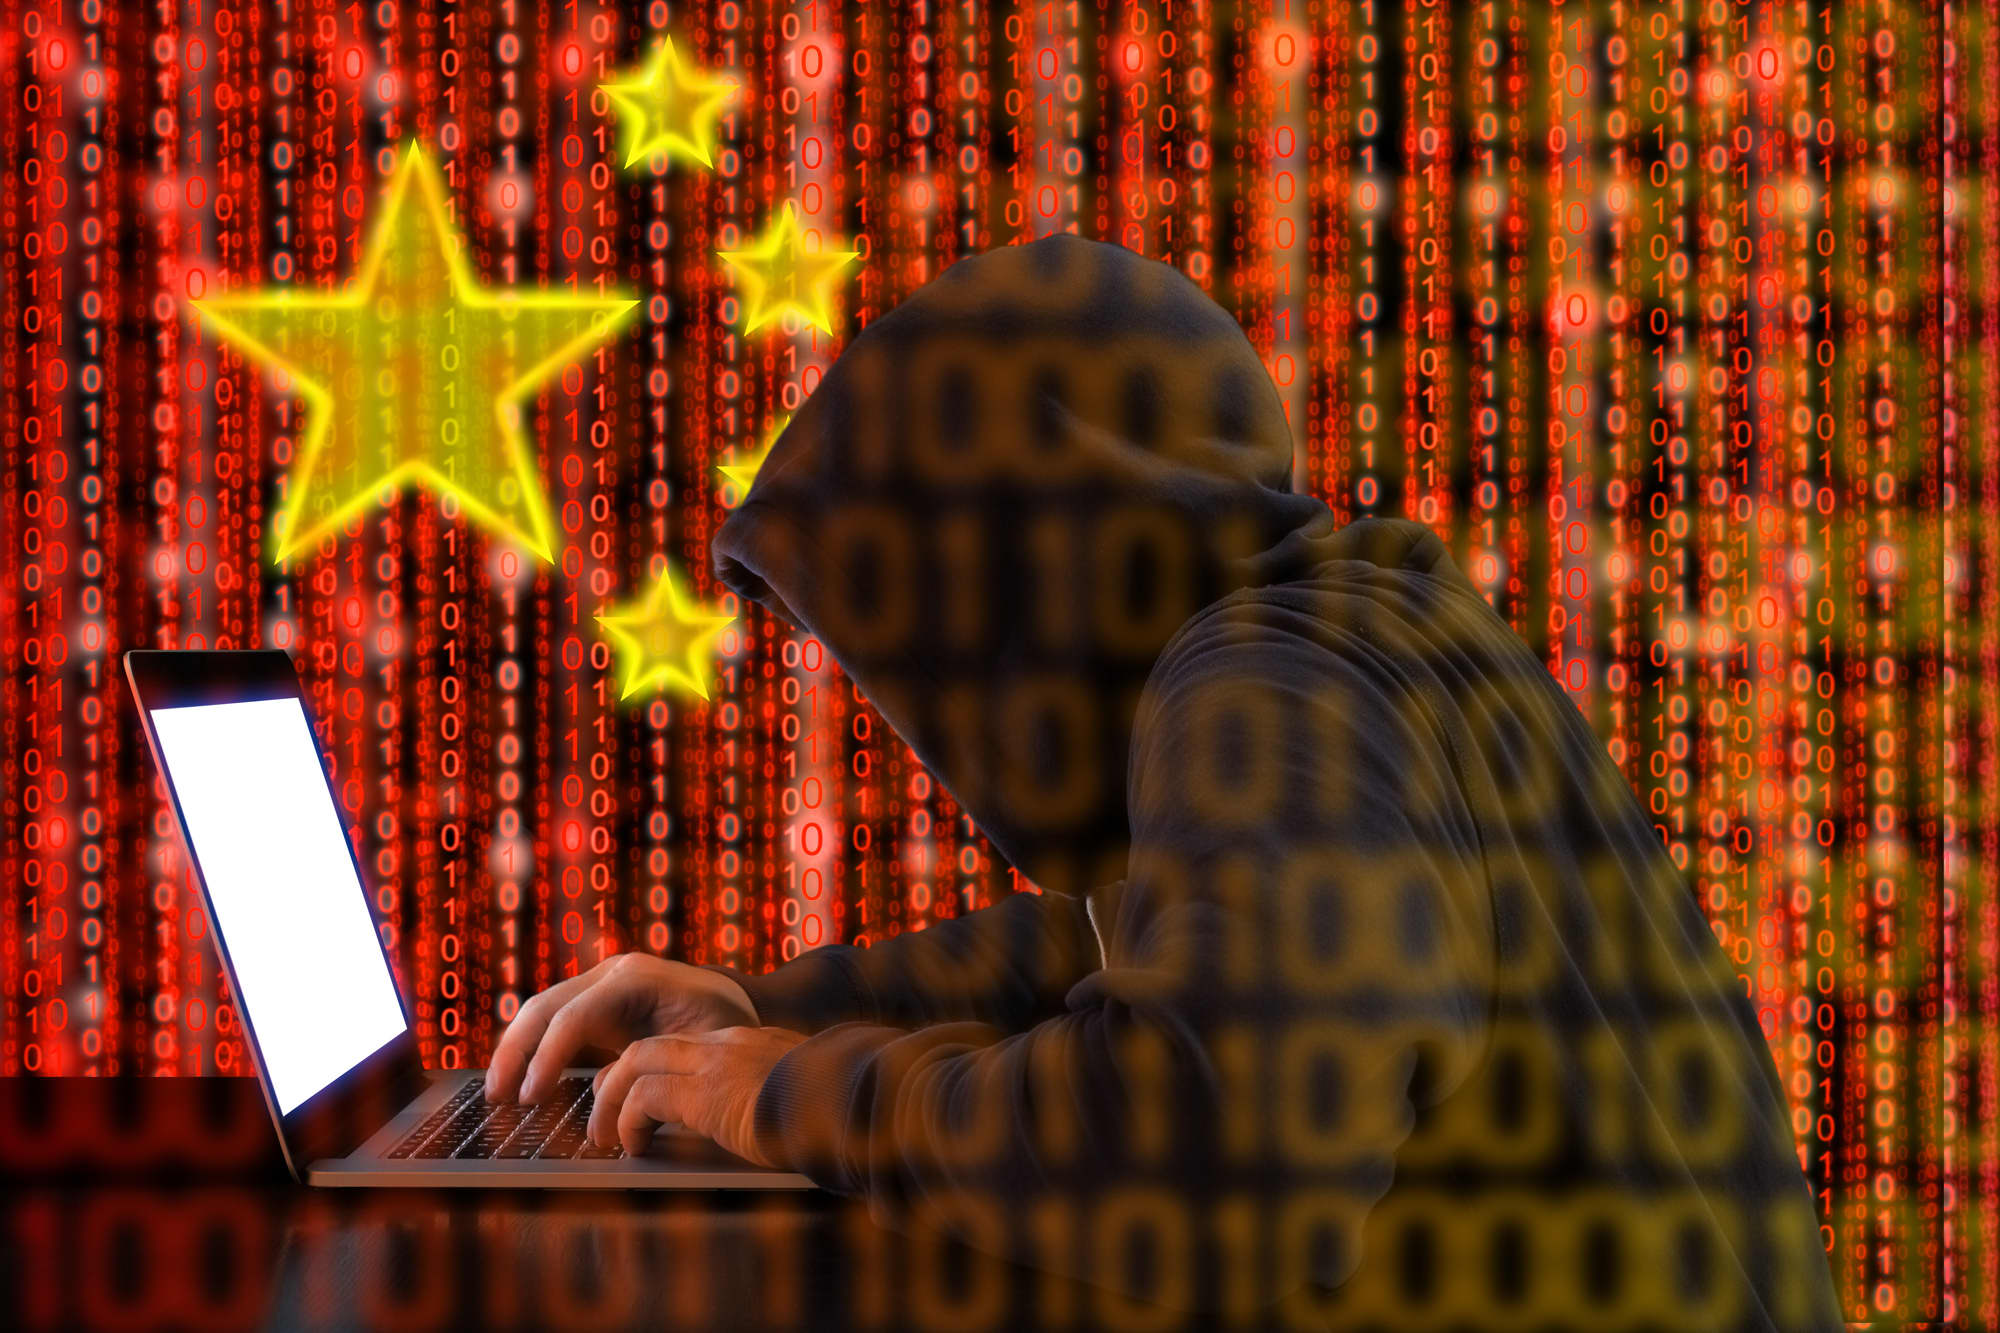 China state-backed hackers compromised networks of at least 6 U.S. state governments, research finds